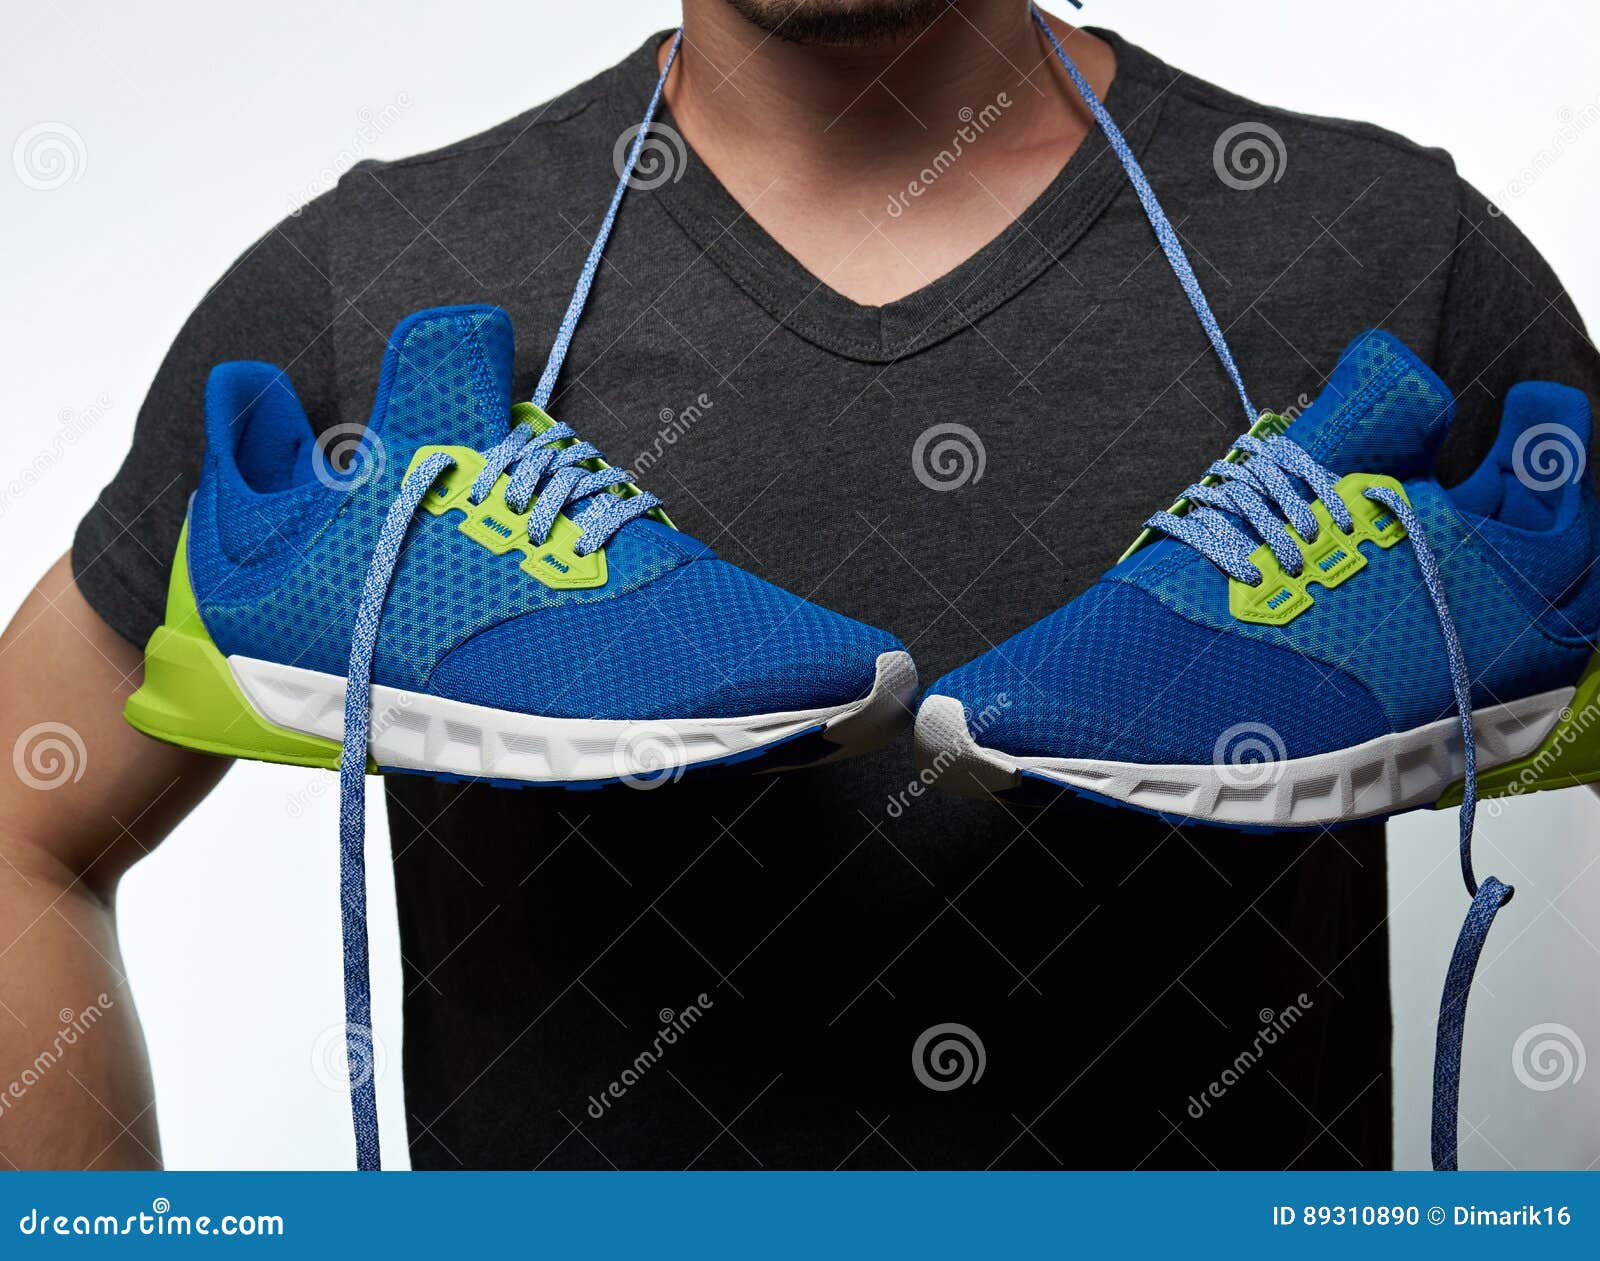 https://thumbs.dreamstime.com/z/man-hanging-shoes-neck-laces-sport-colorful-blue-running-sneakers-89310890.jpg